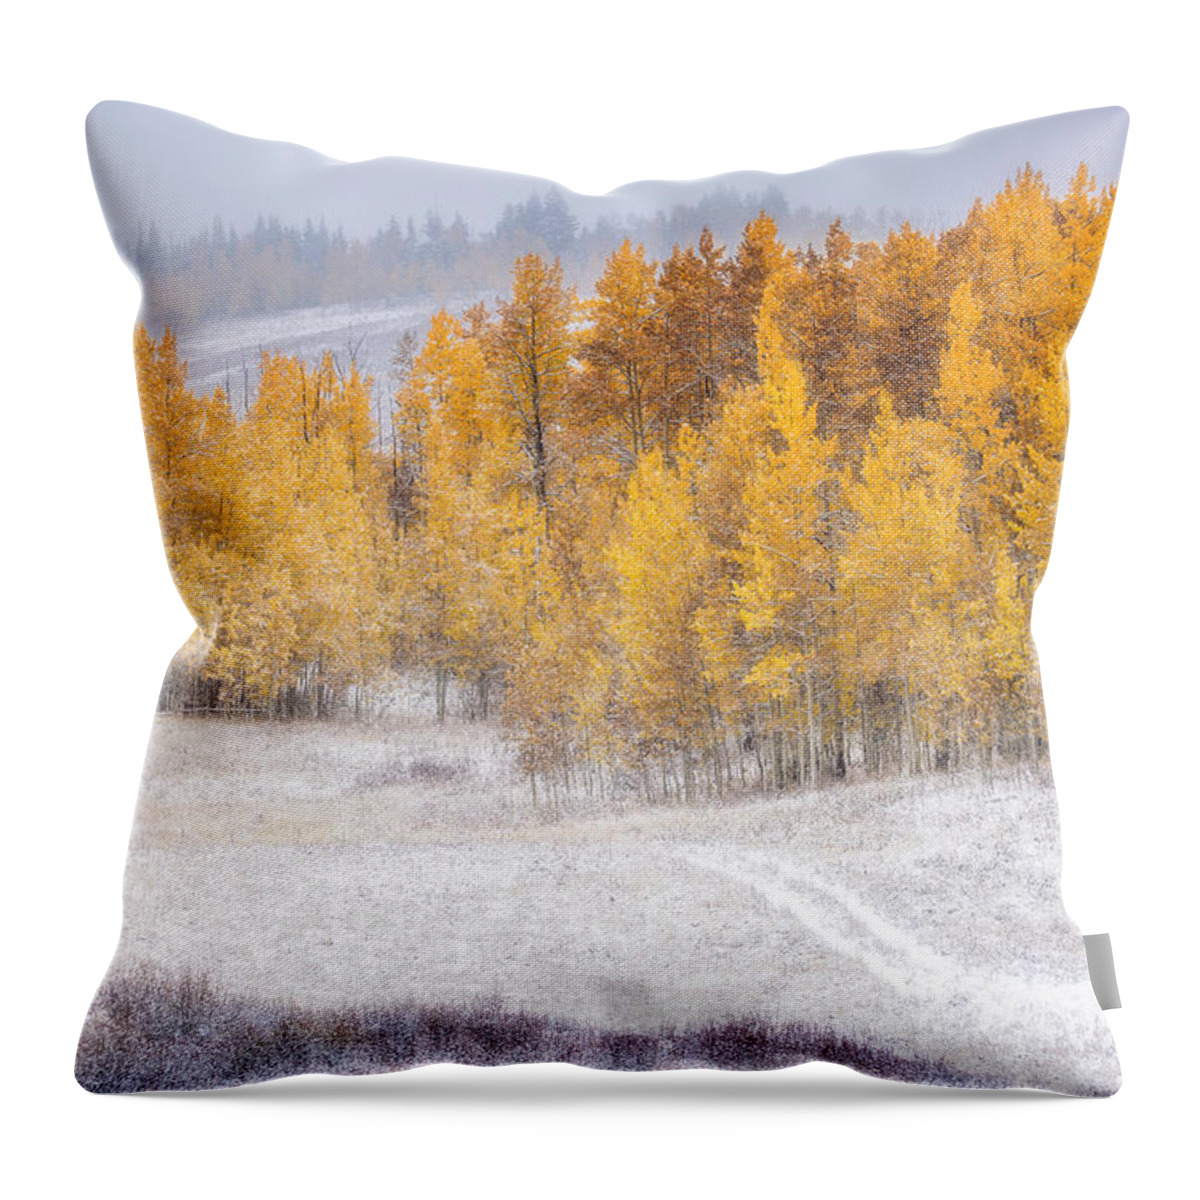 Colorado Throw Pillow featuring the photograph Merging Seasons by Kristal Kraft